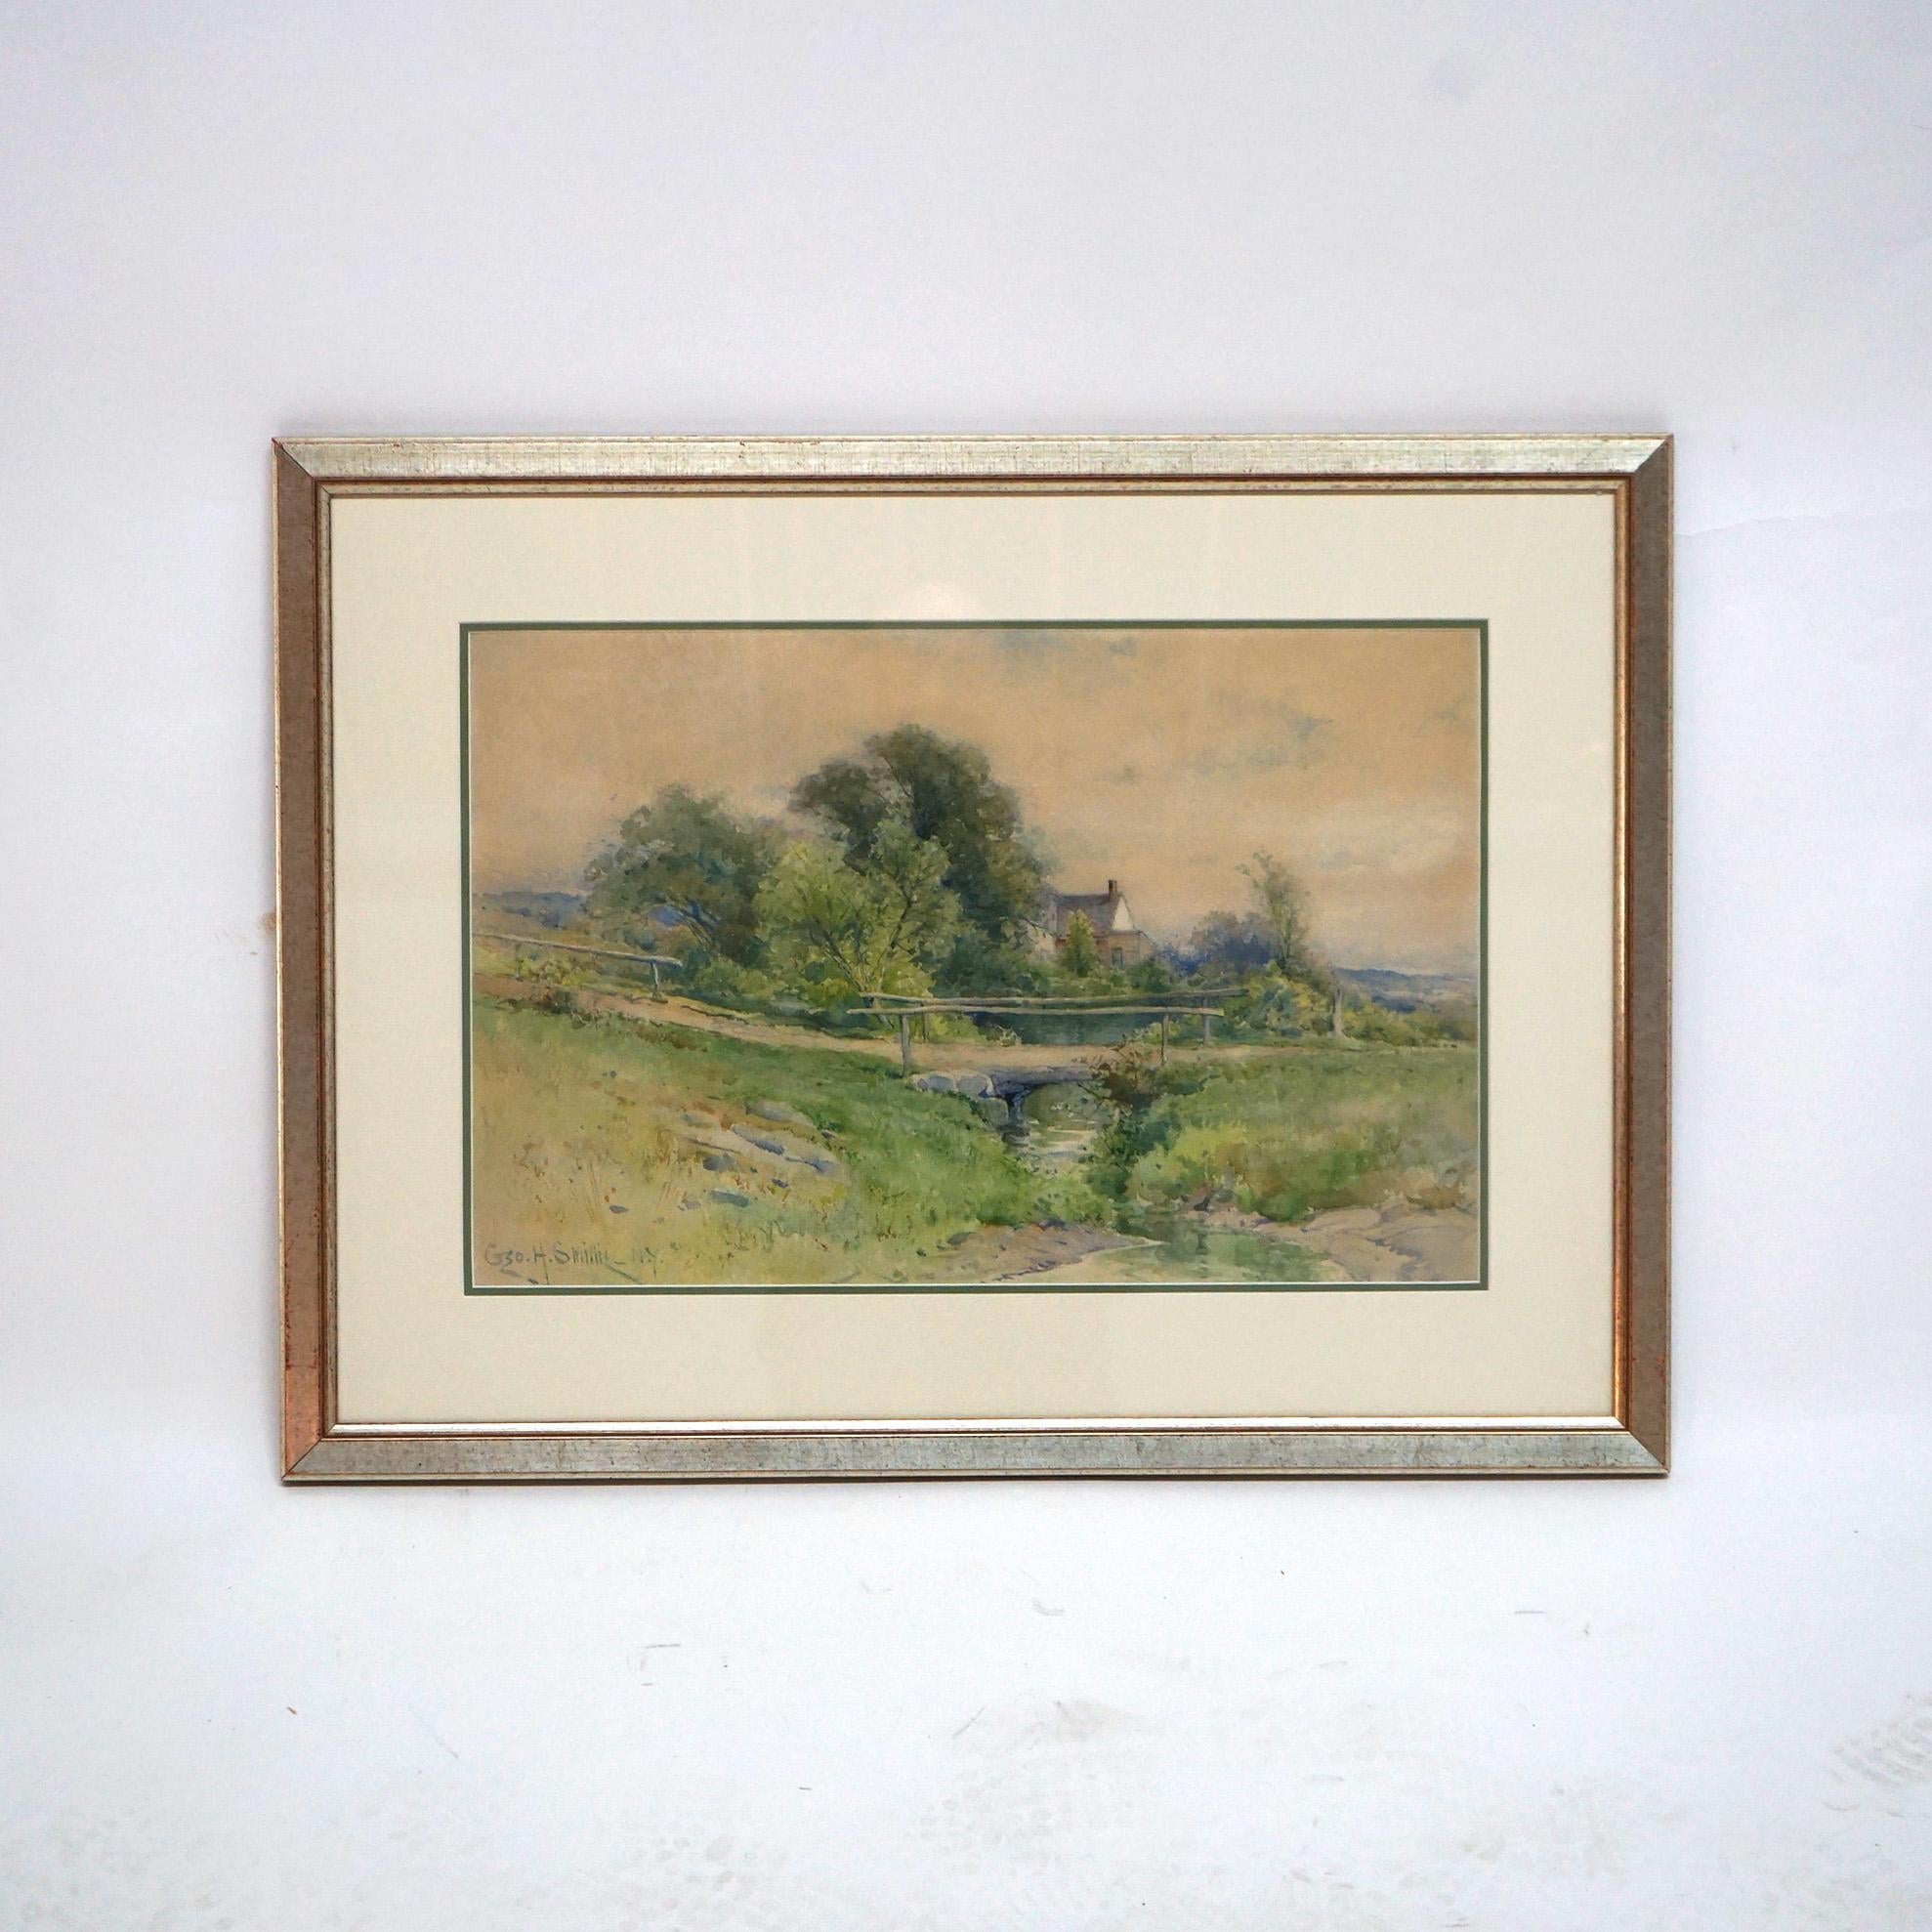 Hand-Painted Watercolor Landscape Painting with Country Bridge by G H Smillie, Framed, 20thC For Sale